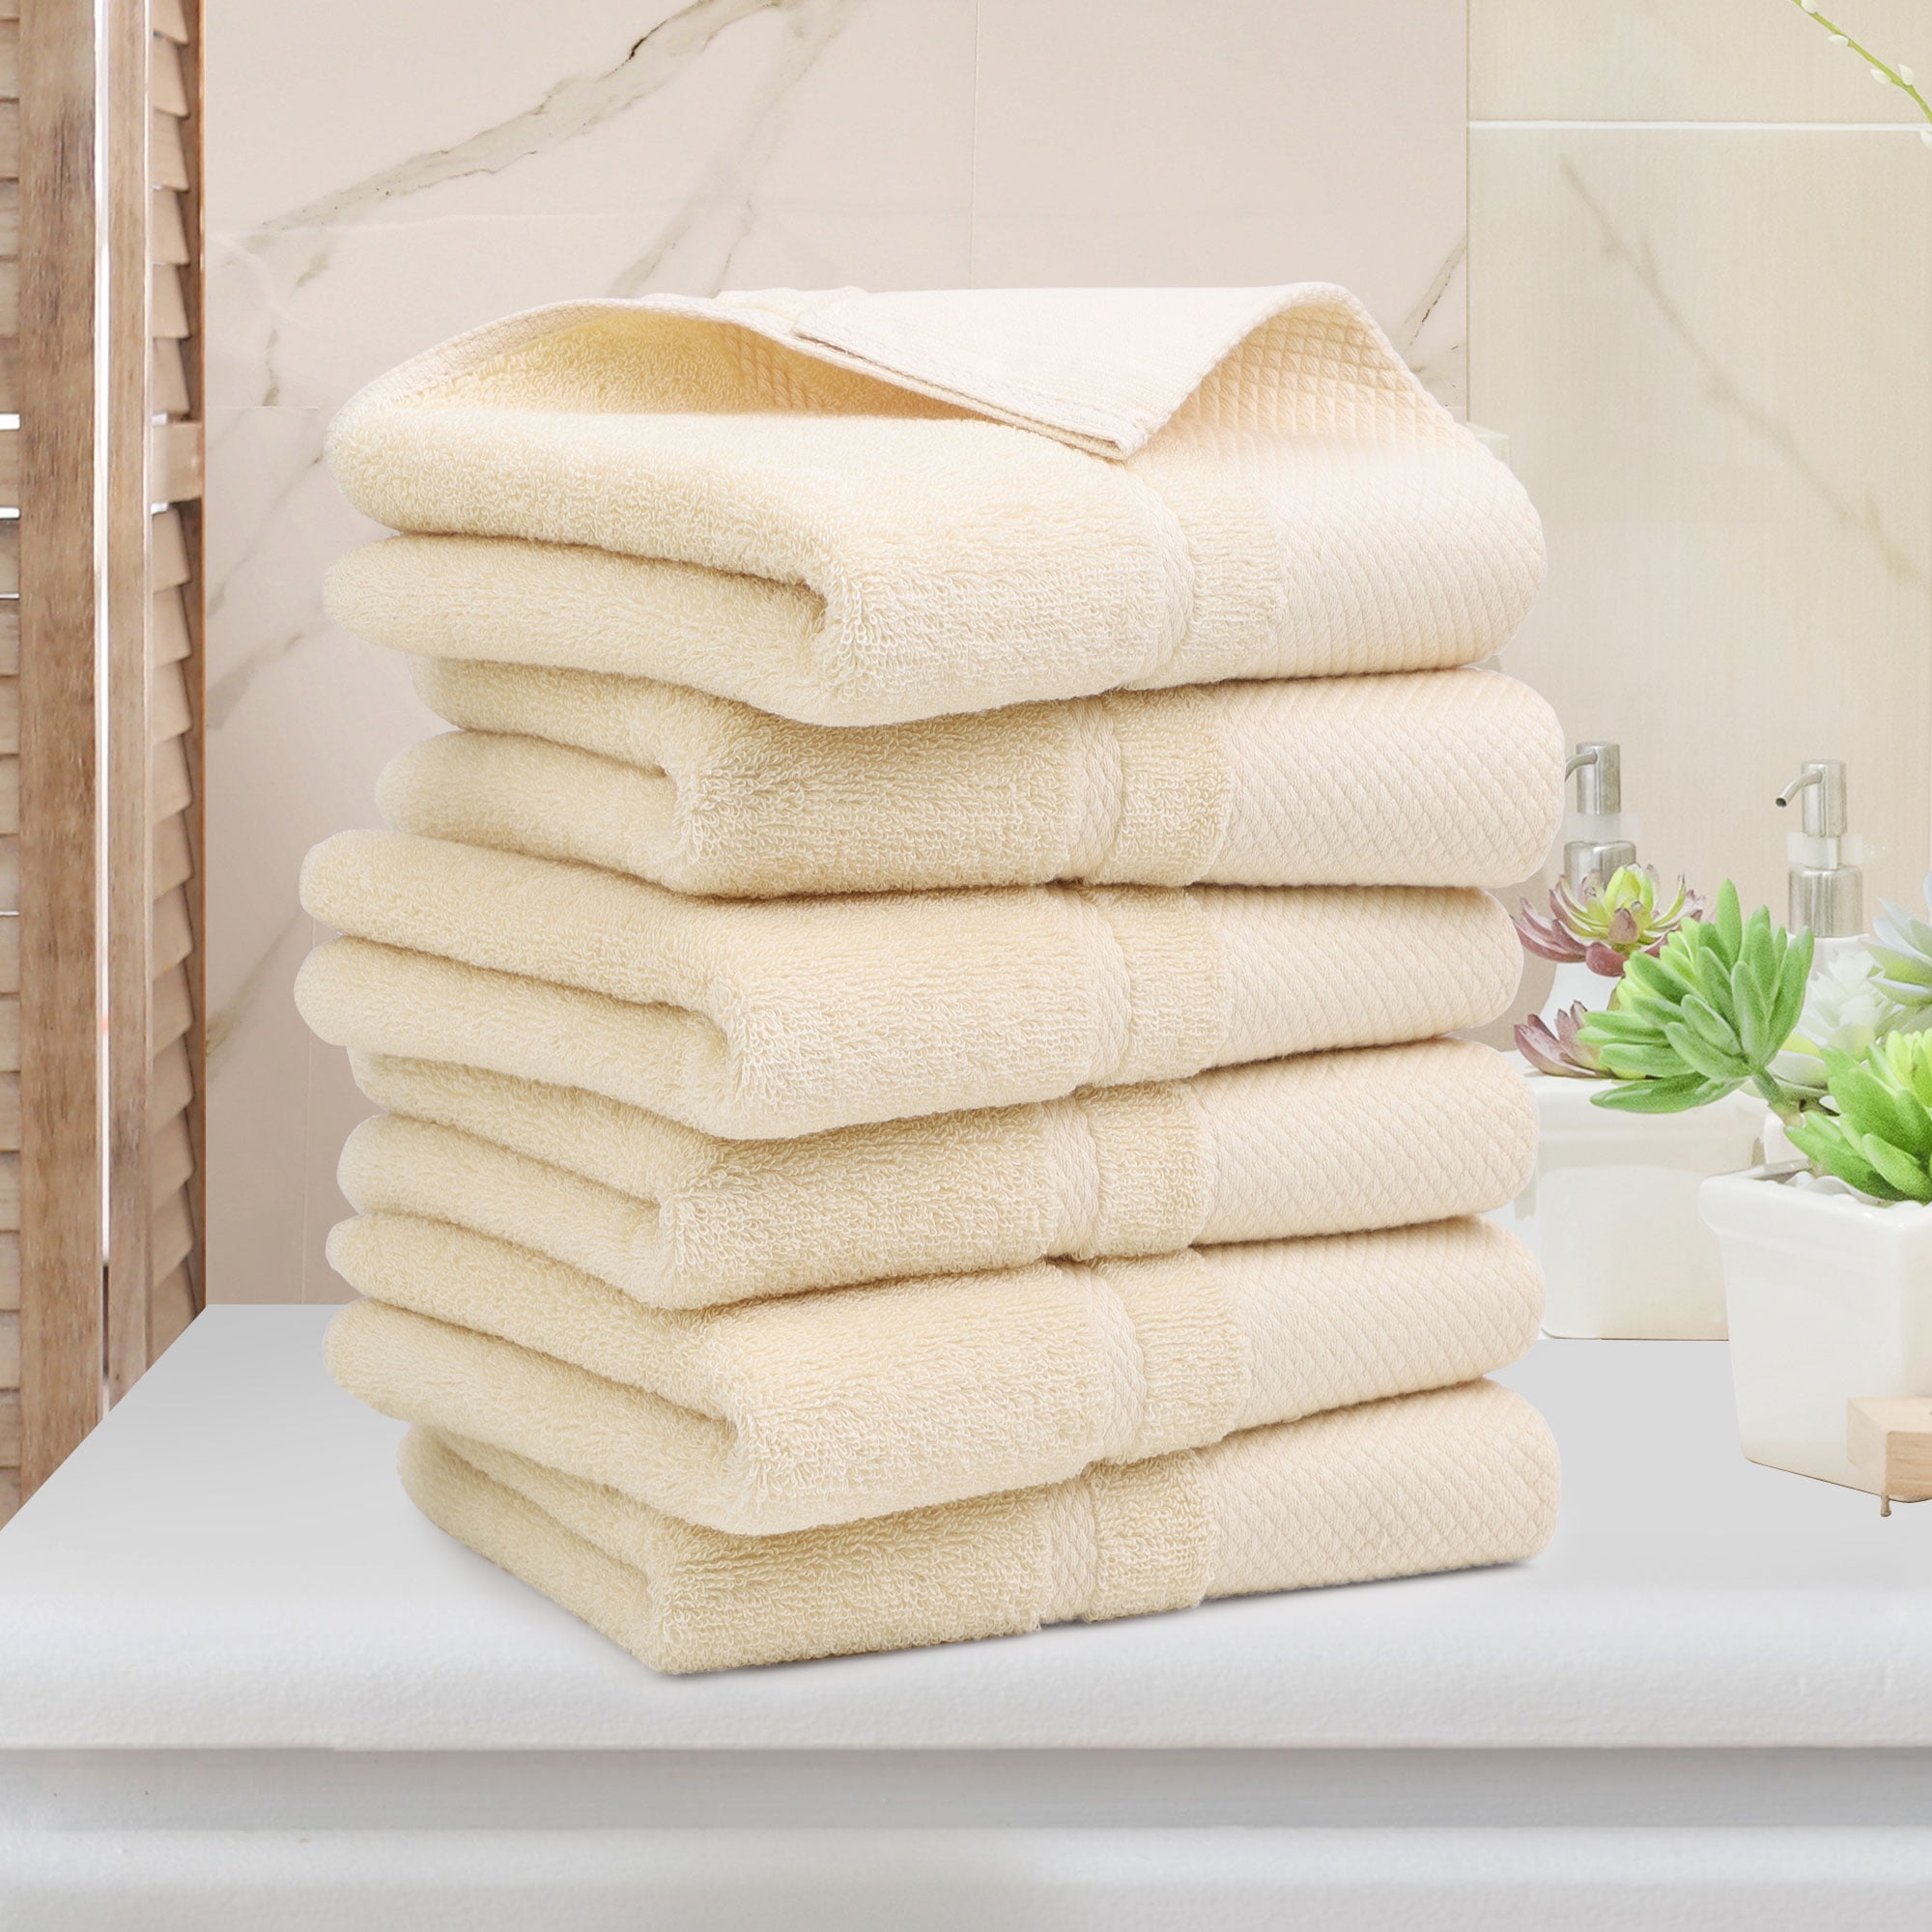 Unique Bargains 2-Pack Lightweight Cotton Hand Towels 16 inch x 30 inch Champagne